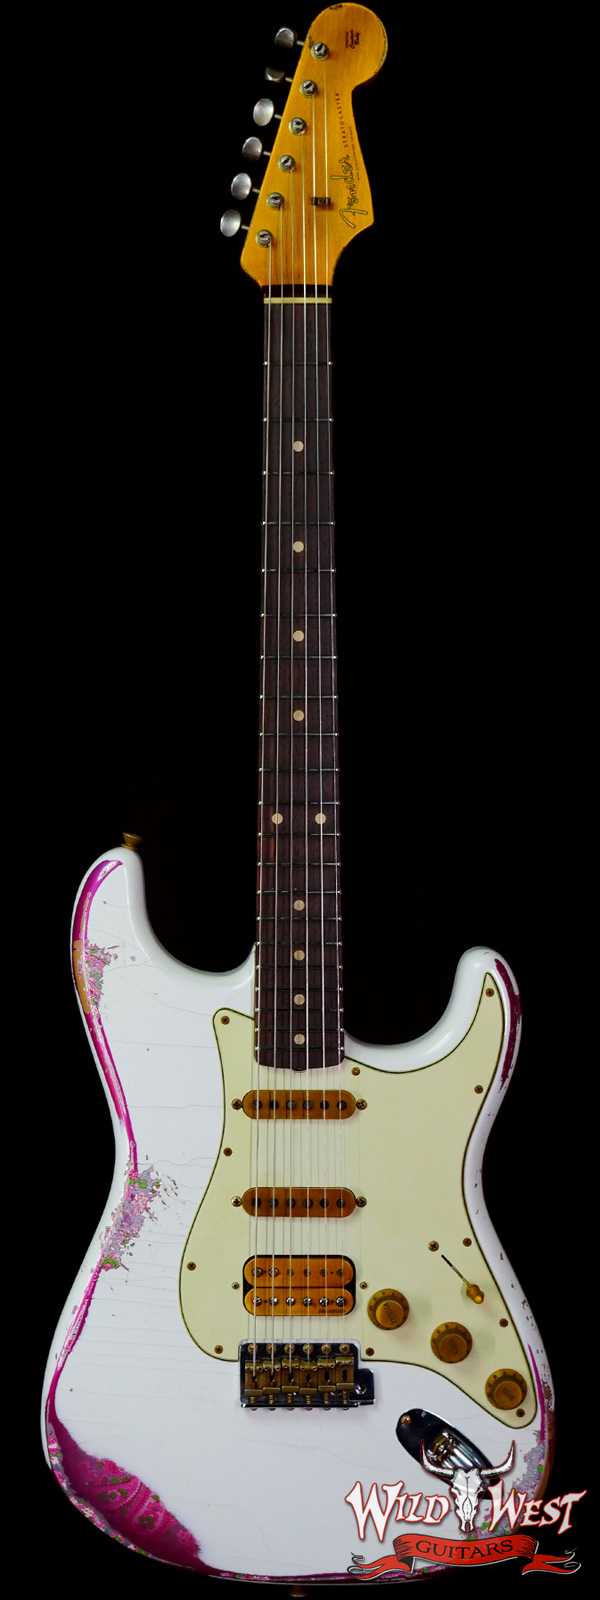 Fender Custom Shop Wild West White Lightning 2.0 Stratocaster HSS Rosewood Board 21 Frets Heavy Relic Pink Paisley